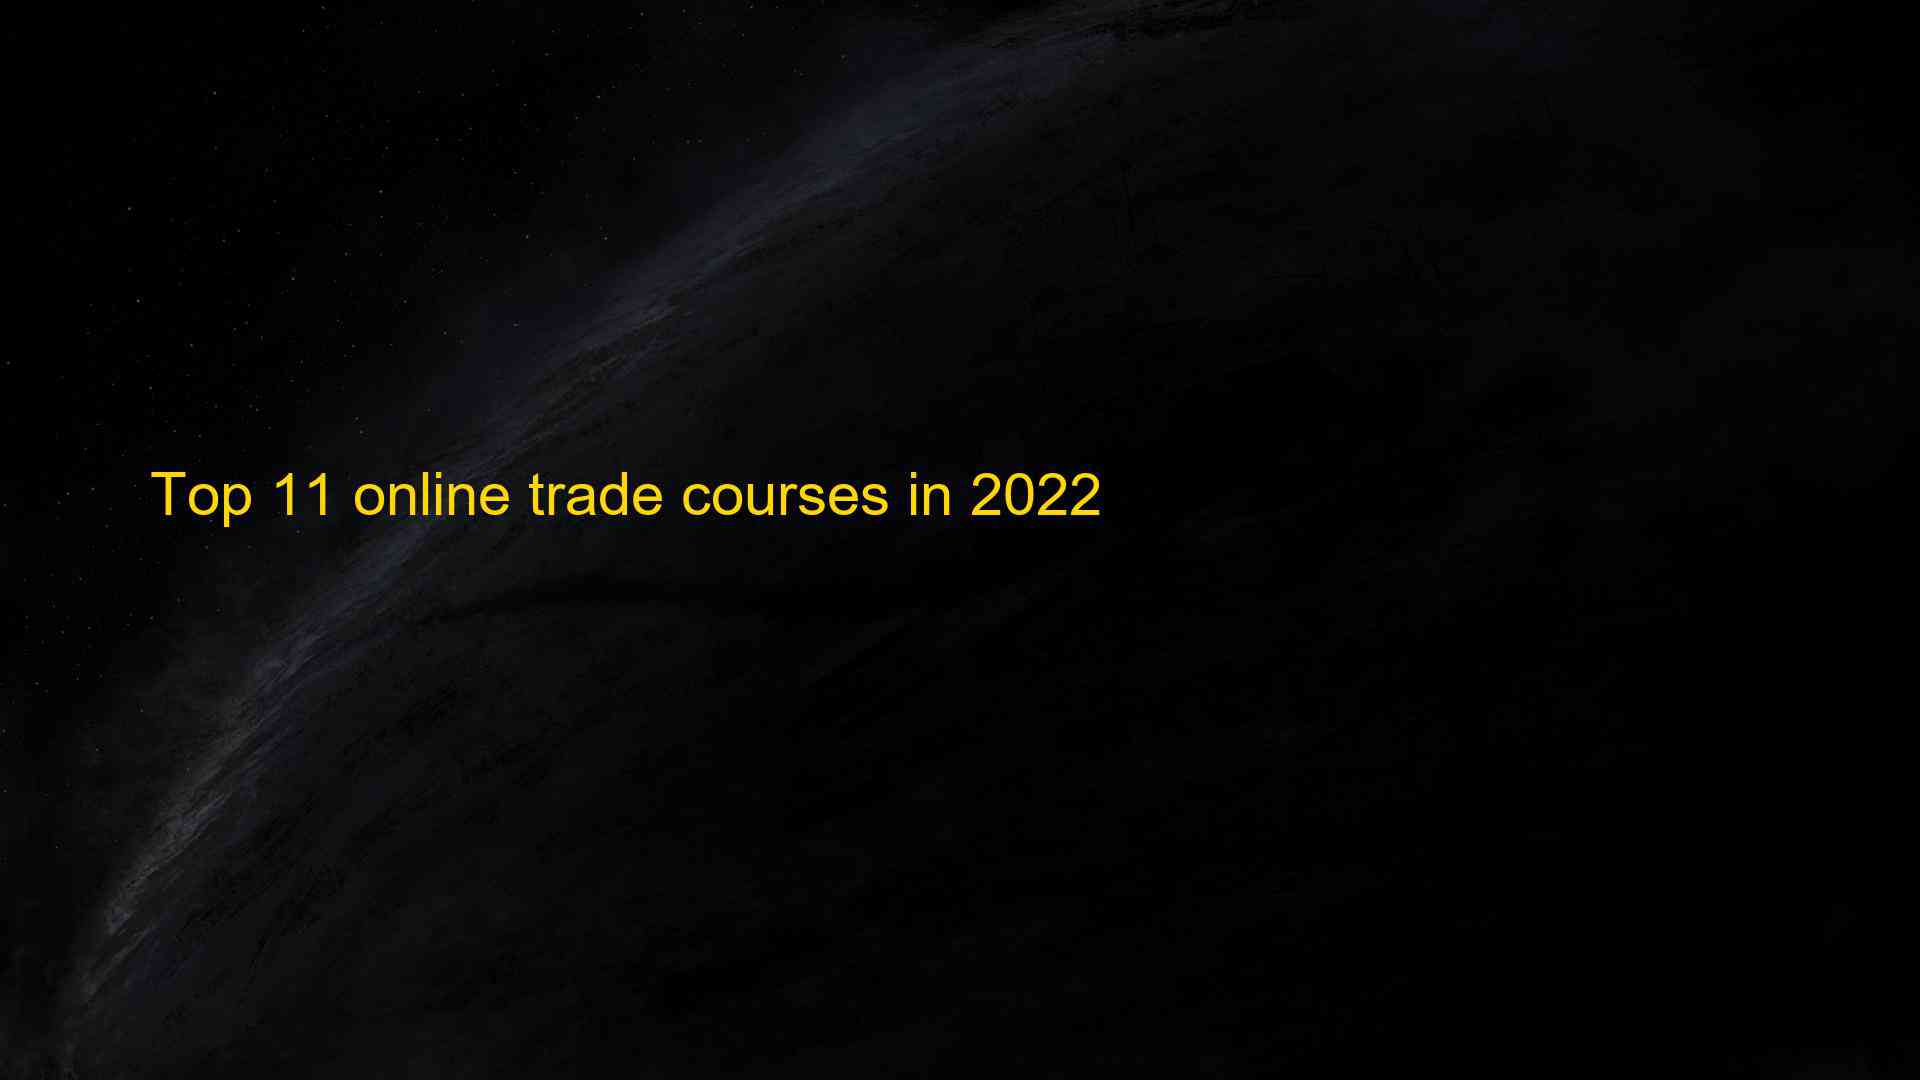 Top 11 online trade courses in 2022 1660875606